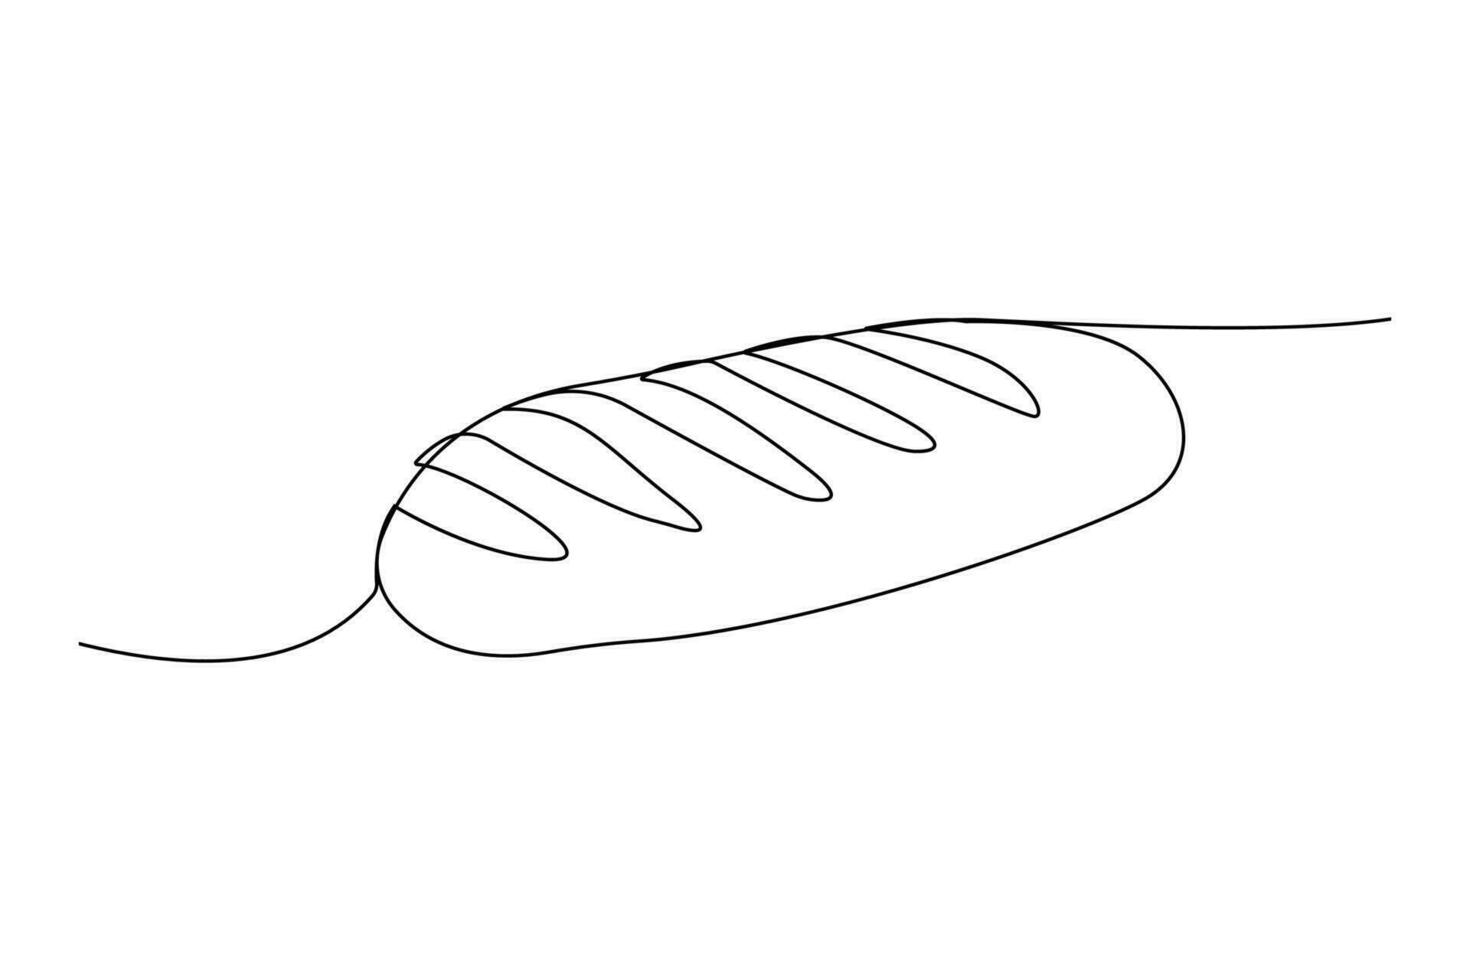 Single continuous line drawing of a bread vector